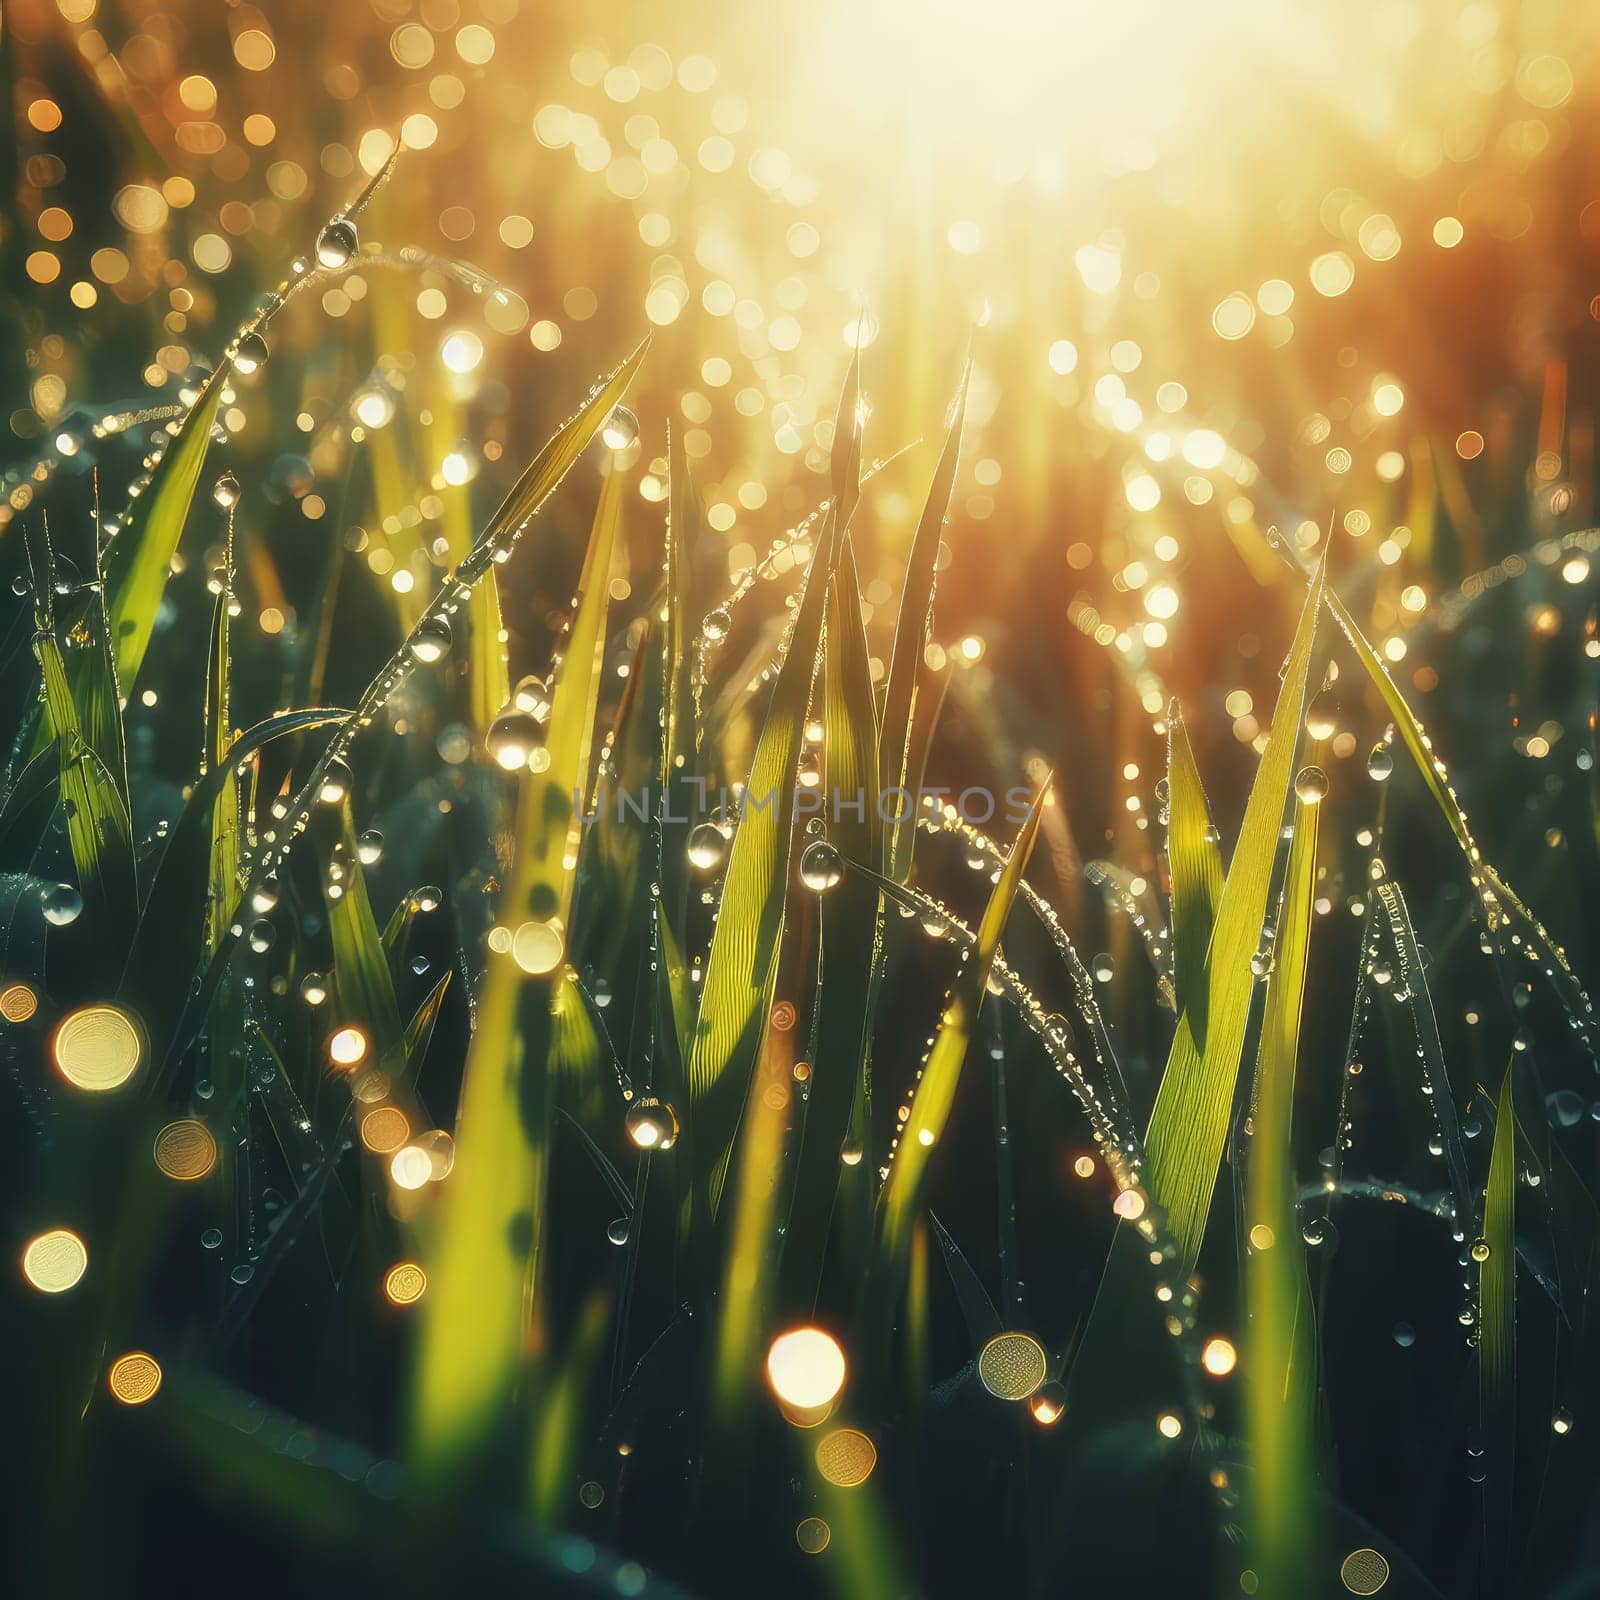 morning dew drops glistening in the sunshine of the grass.